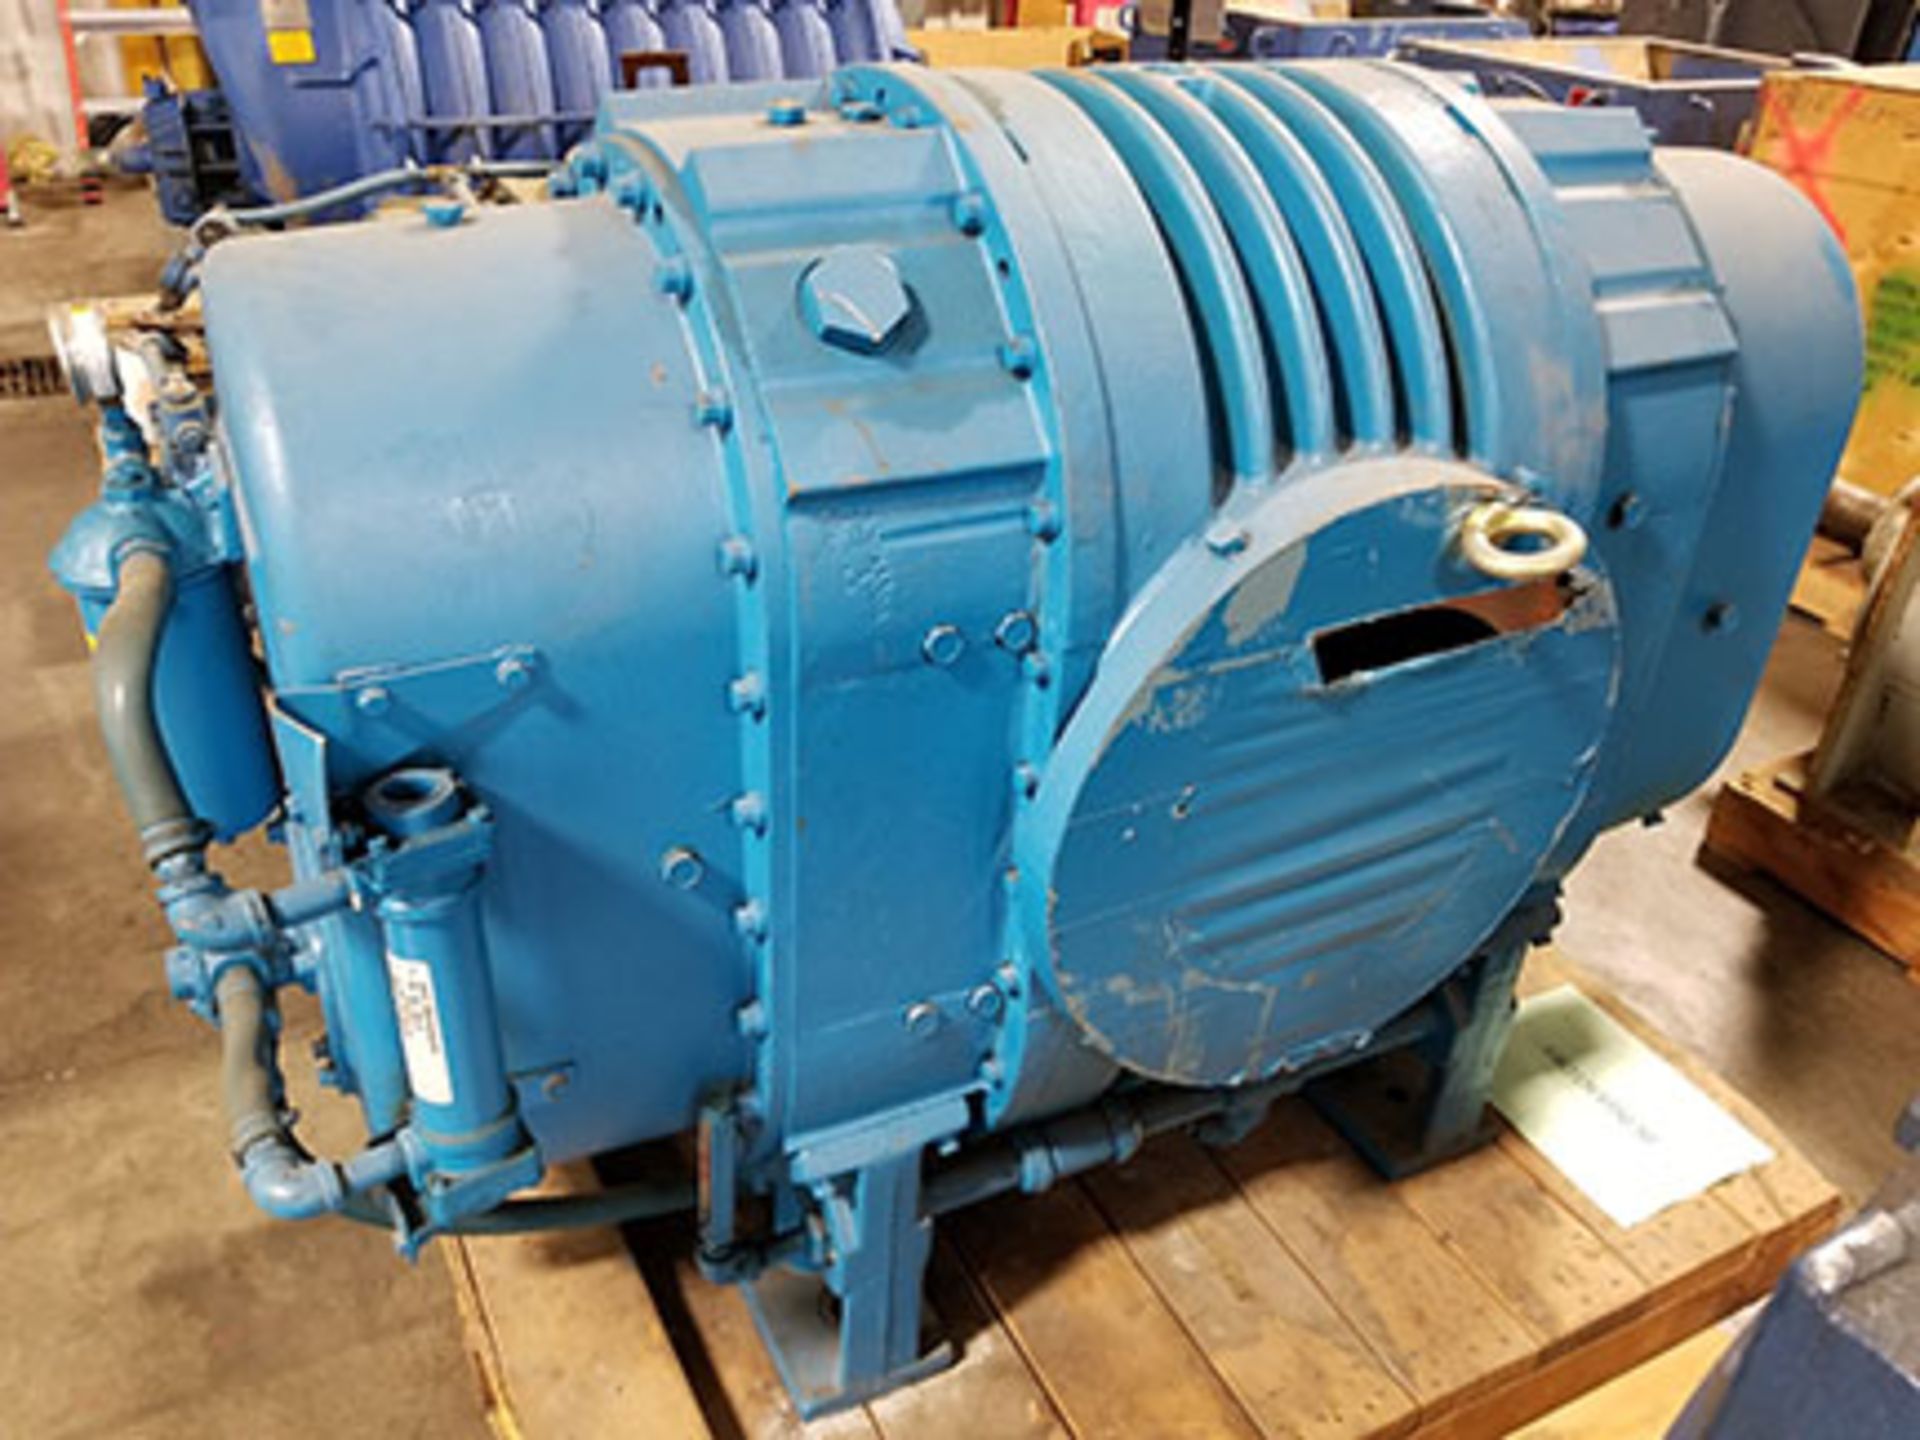 ROTARY LOBE BLOWER, 12" C 16" RAS-V WITH IBB, 35574 INLET VOLUME, 845 RPM, 1998, 68 G. DISCHARGE - Image 3 of 6